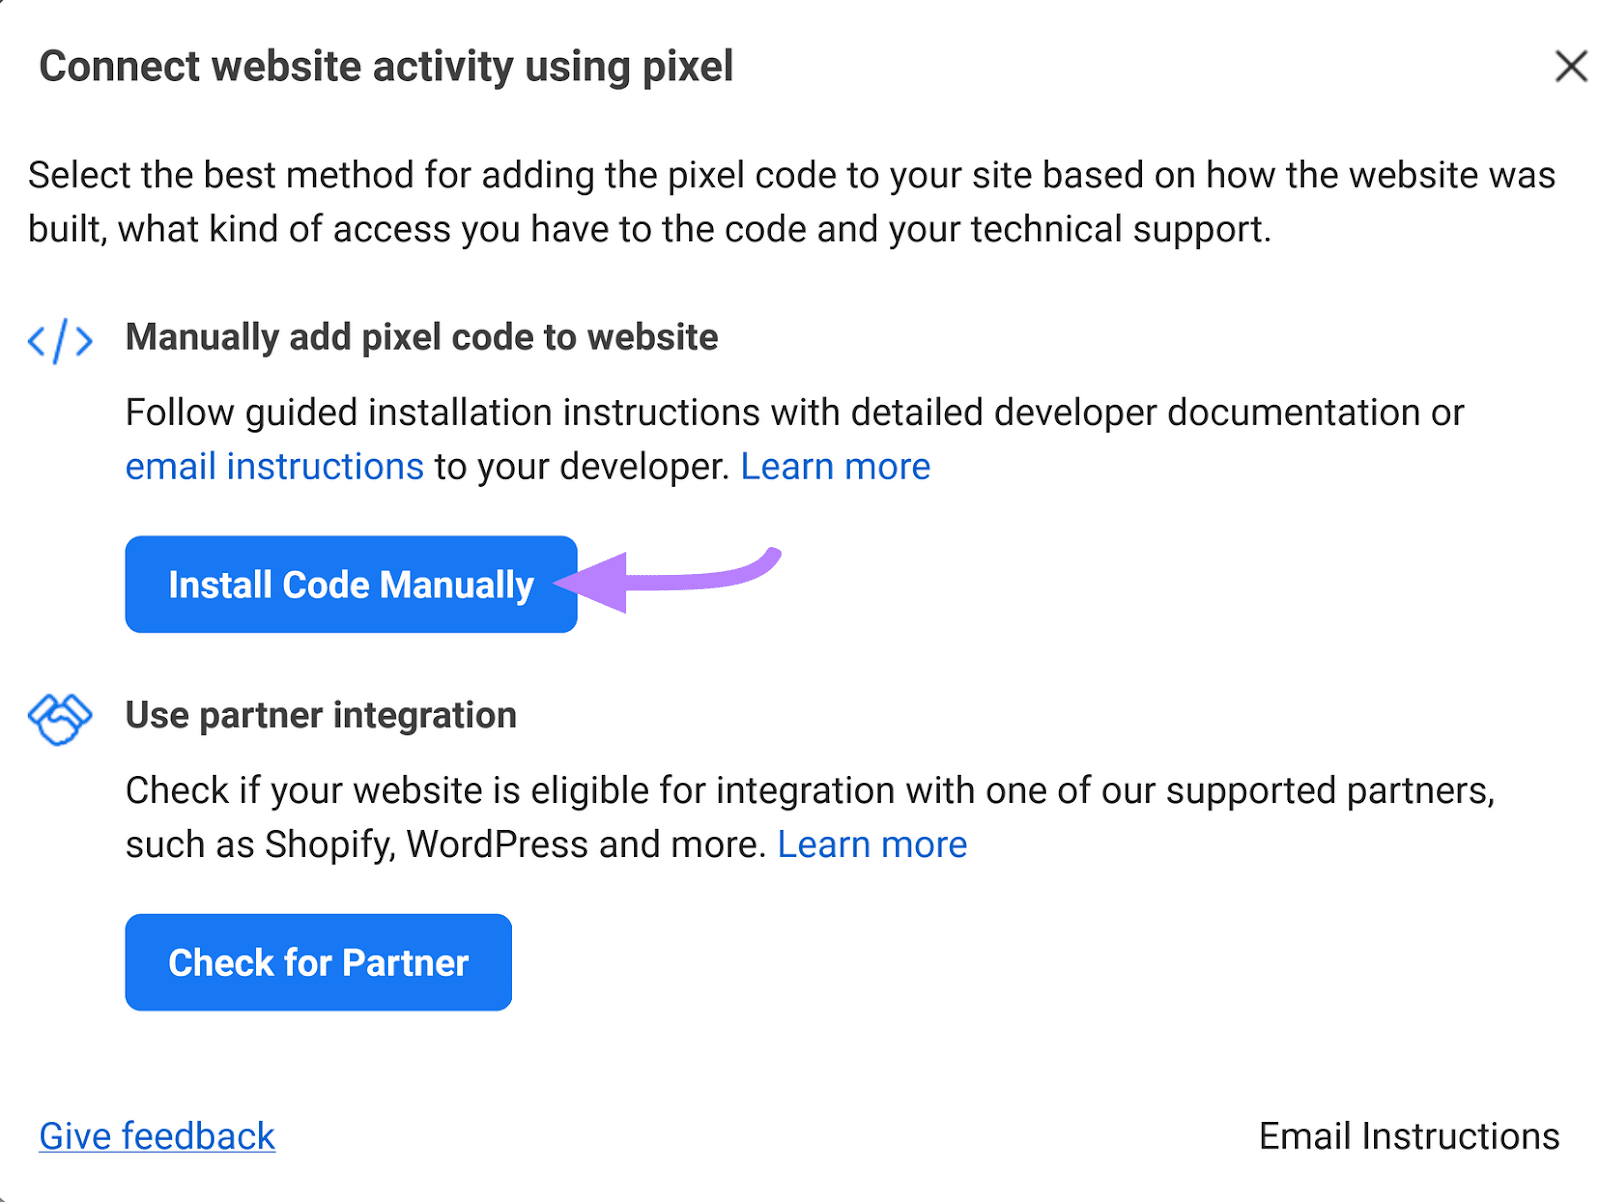 “Install Code Manually" option selected under "Connect website activity using pixel" window